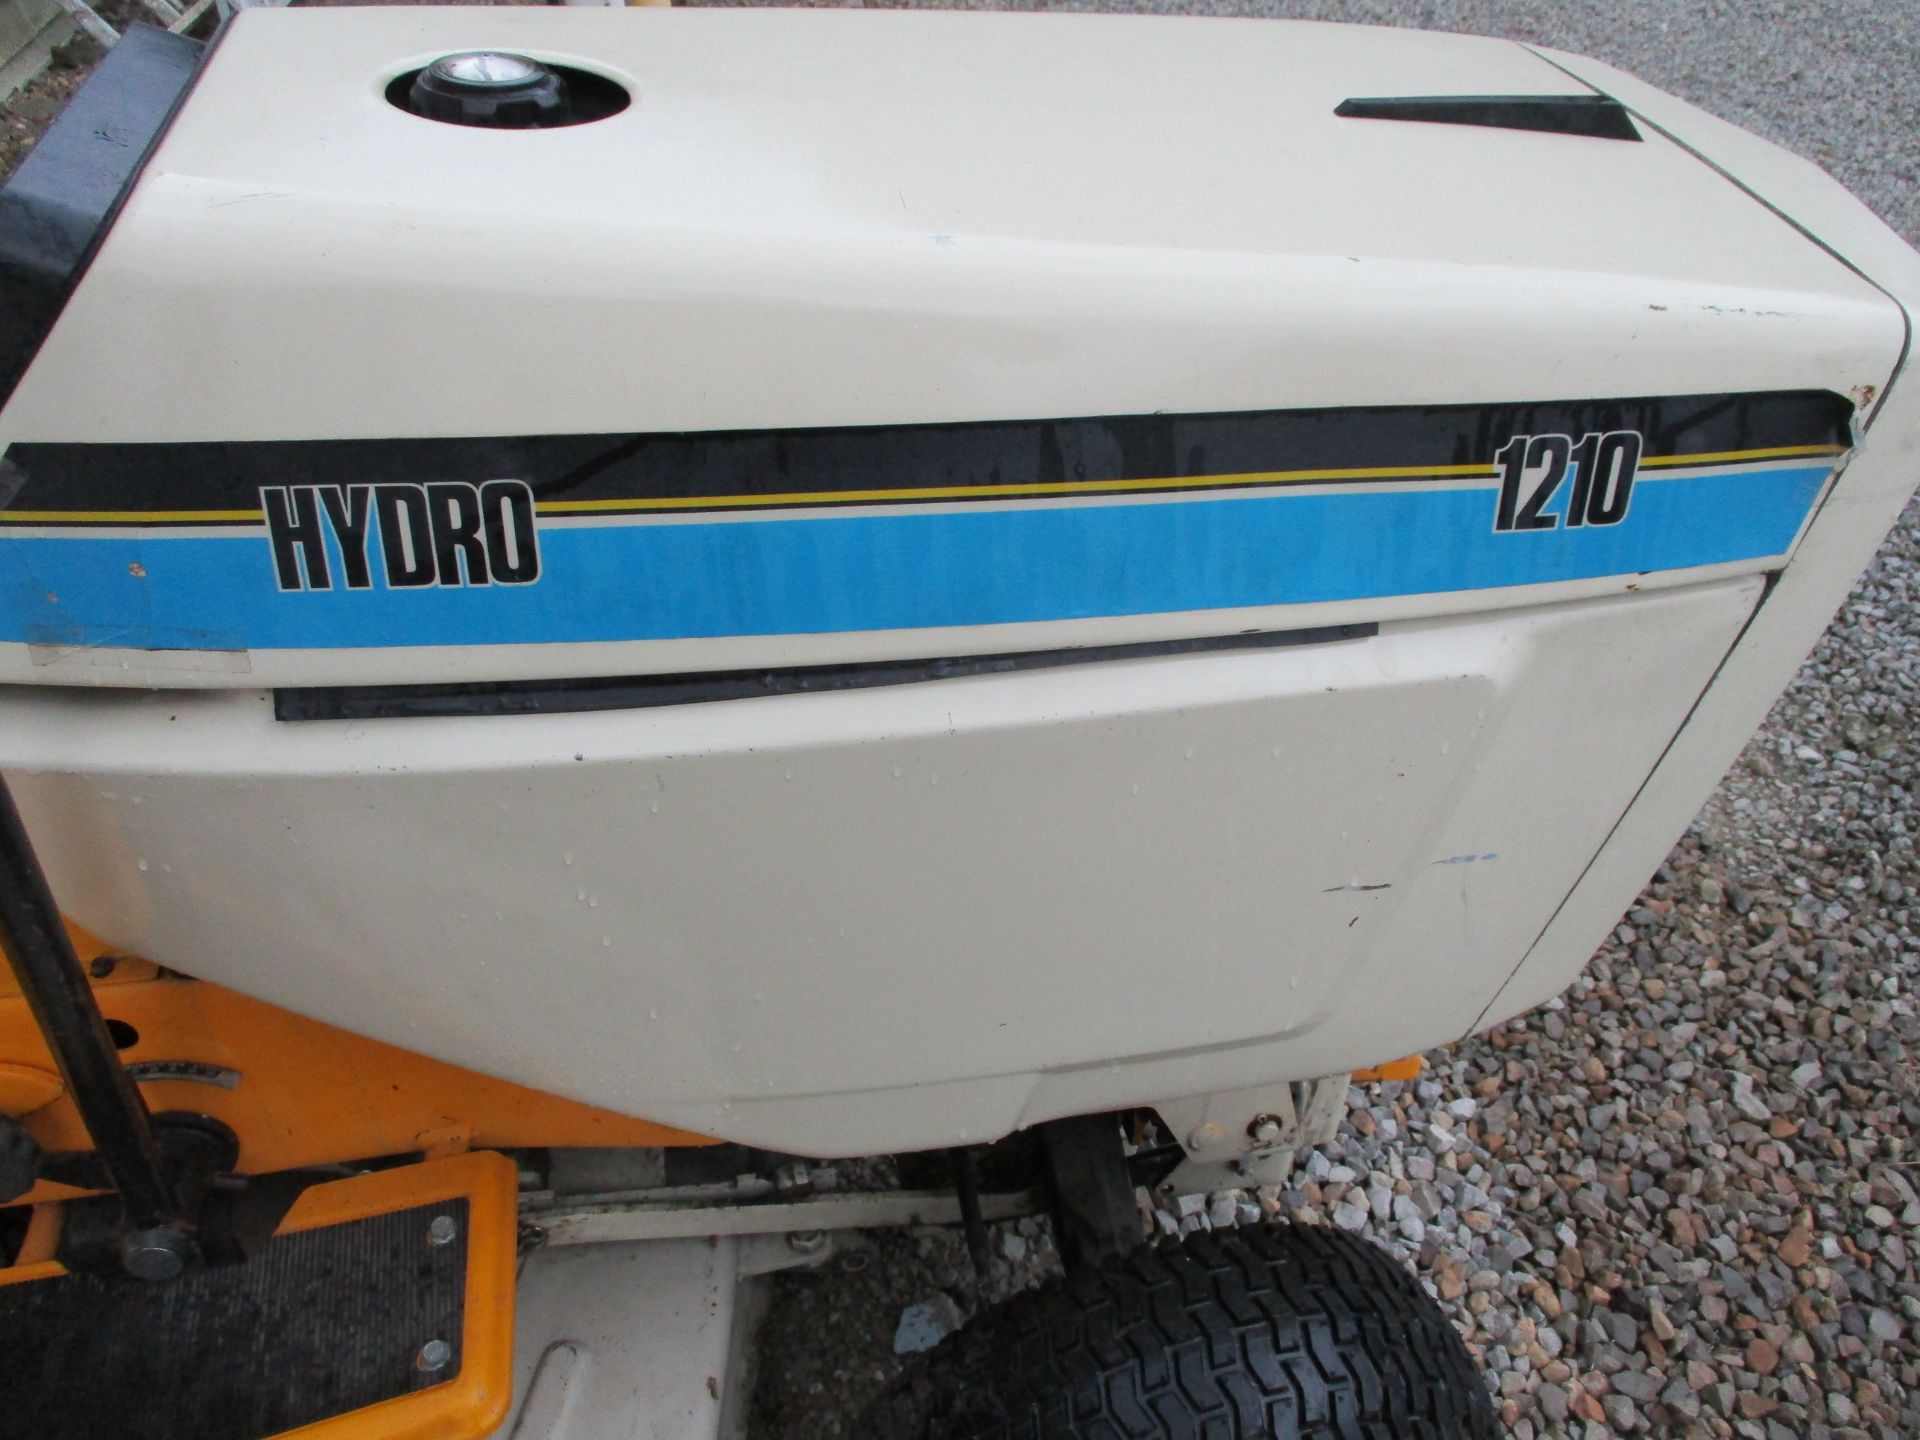 Cub Cadet Model 1210 Hydro Riding Lawn Mower, s/n 784497, 44" Mowing Deck, Newly Rebuilt Engine, - Image 6 of 7